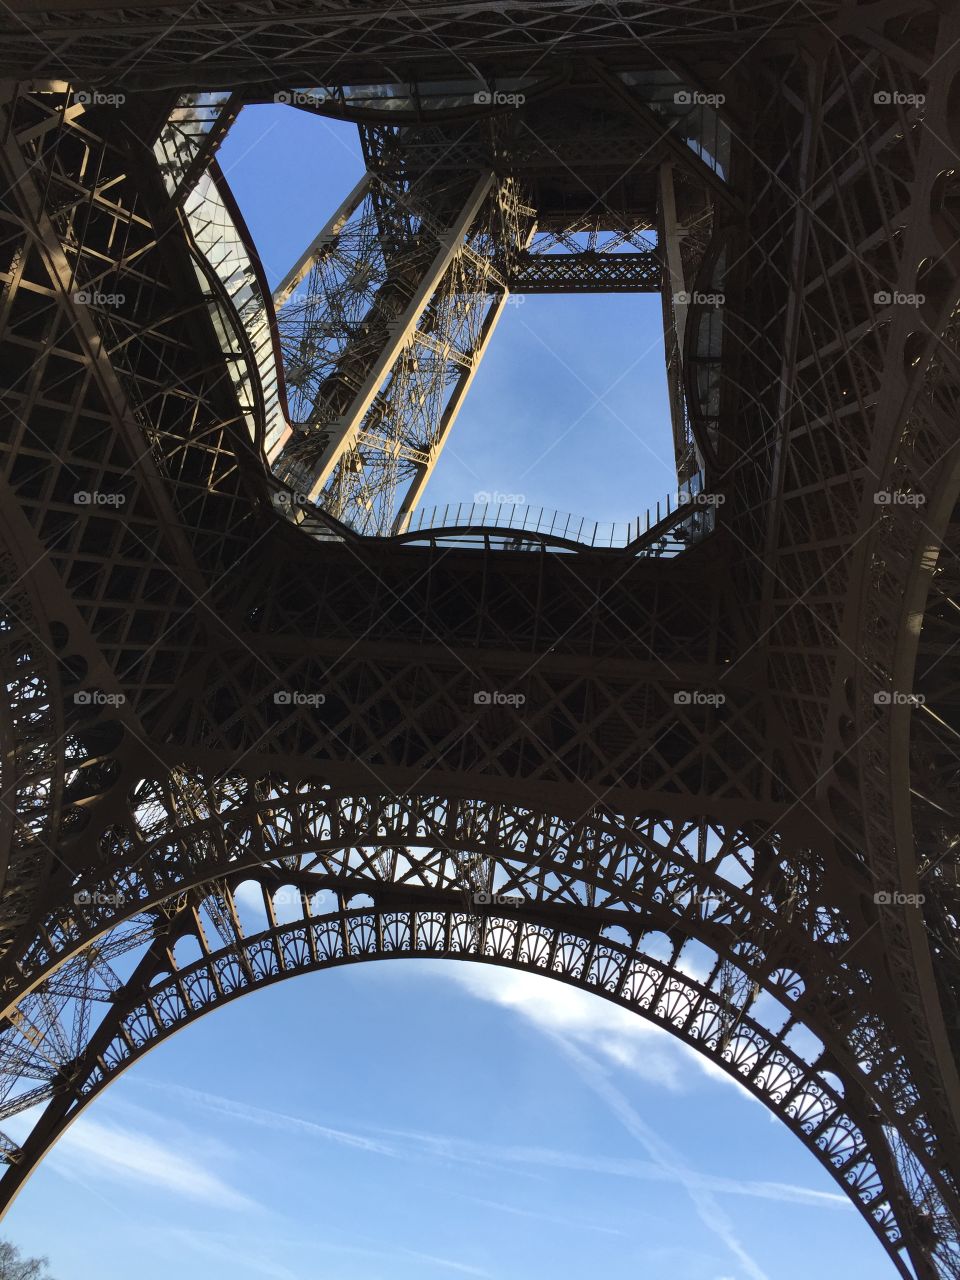 The Eiffel Tower bottom view filters out the blue sky